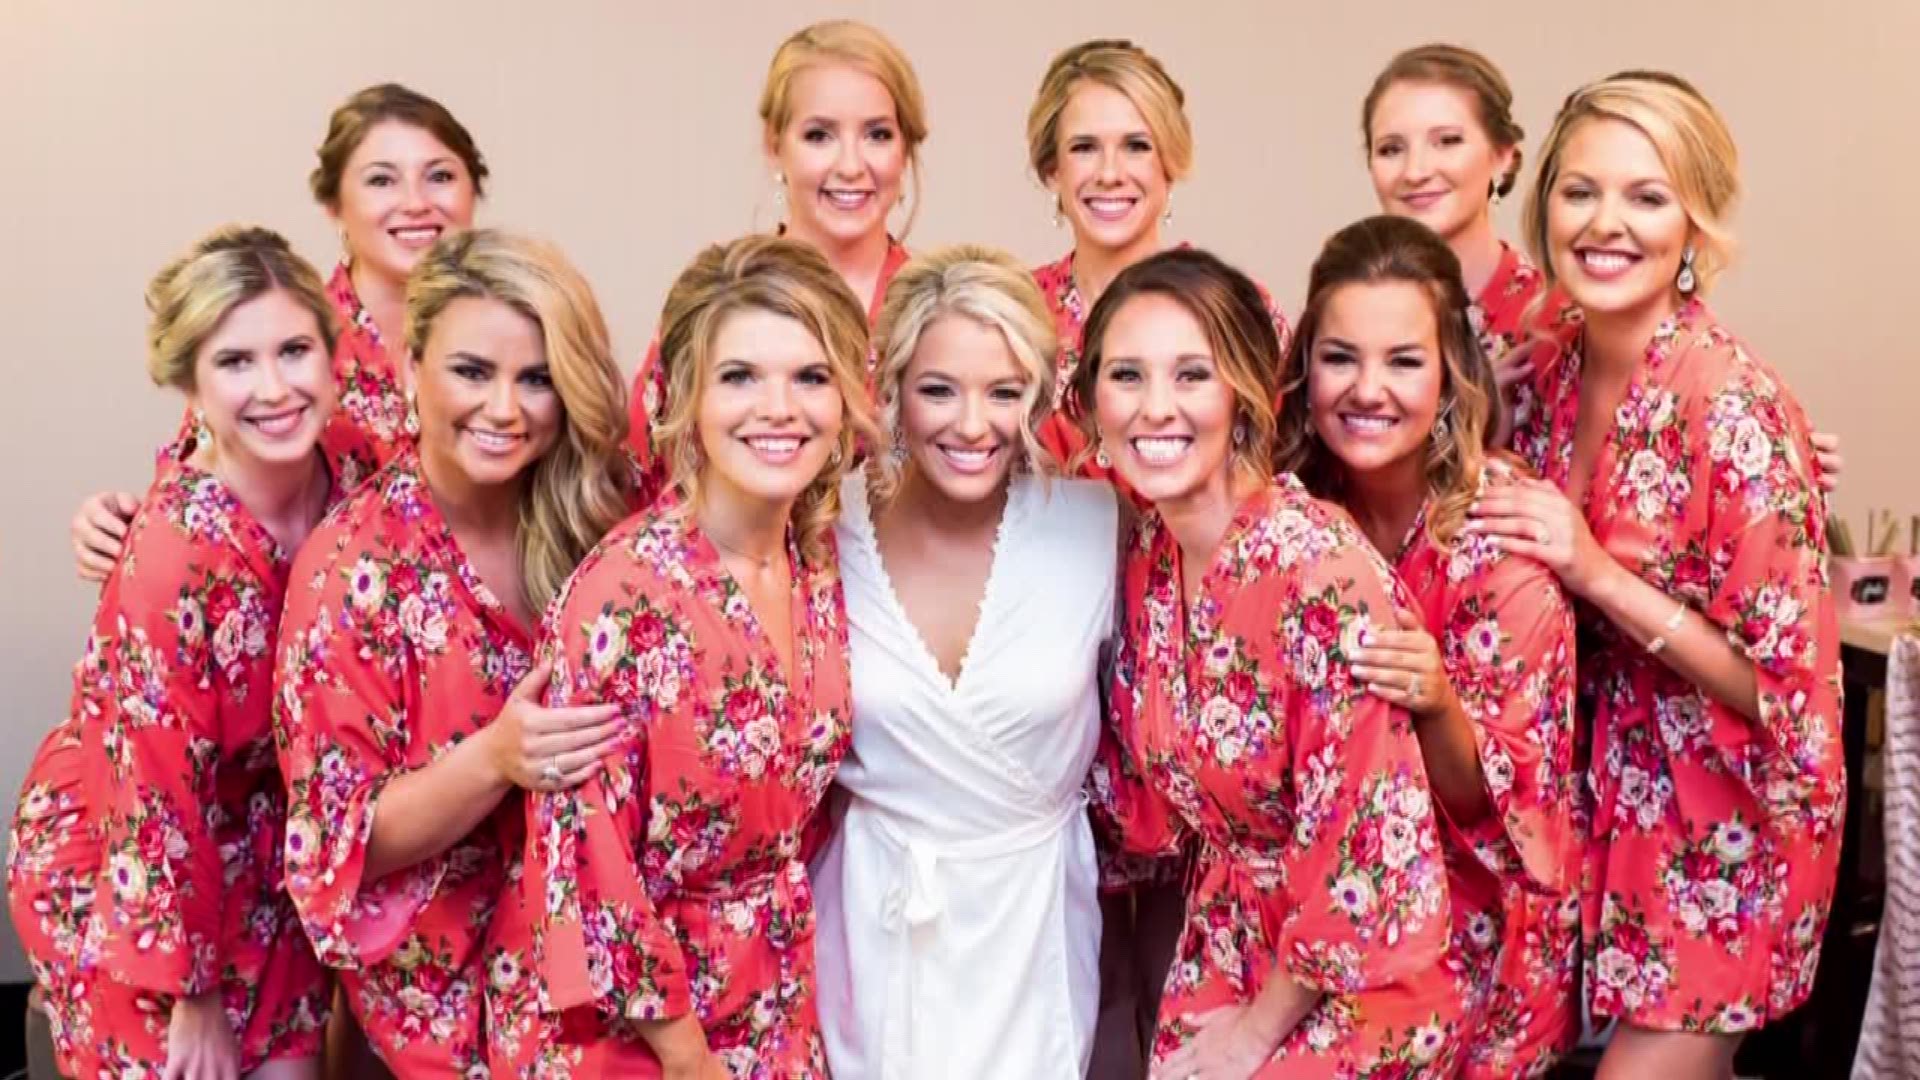 The rising cost of being a bridesmaid